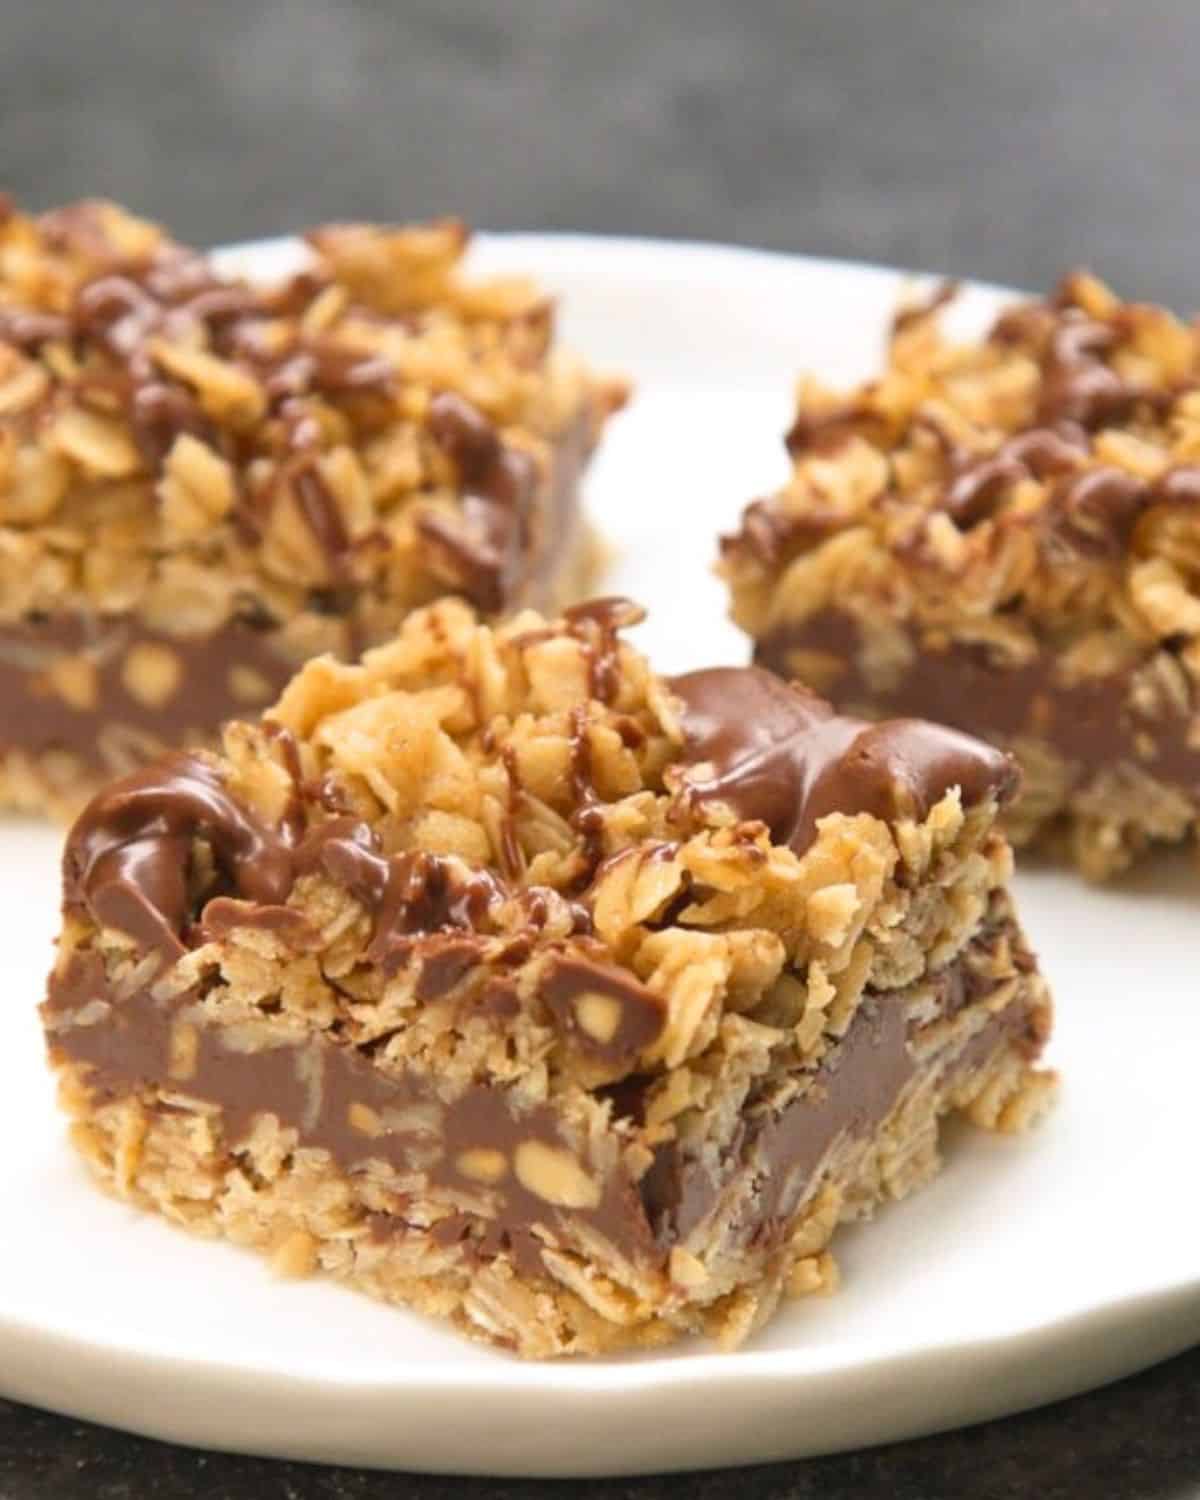 Chocolate oat bars on plate close-up.